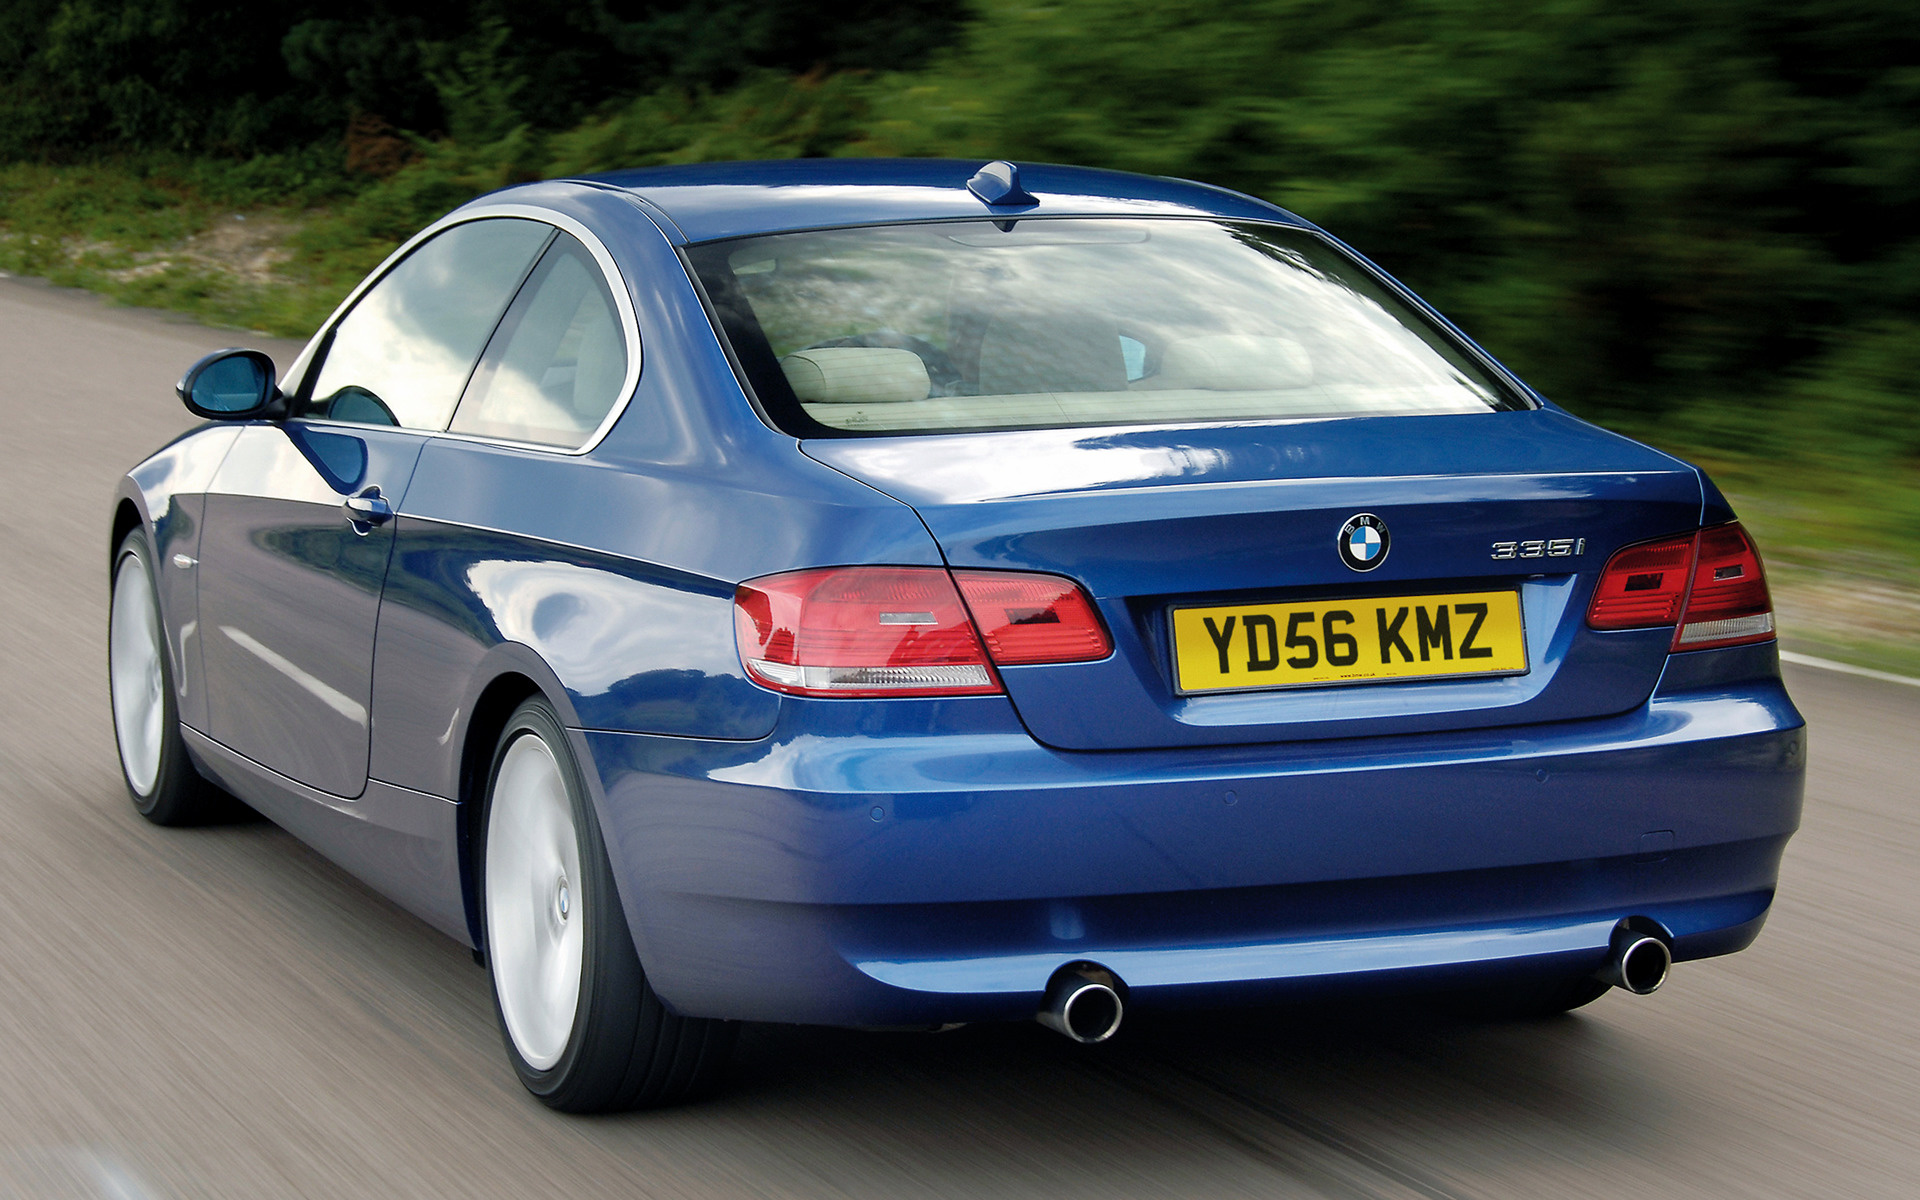 2006 BMW Series Coupe (UK) - Wallpapers and Images | Pixel